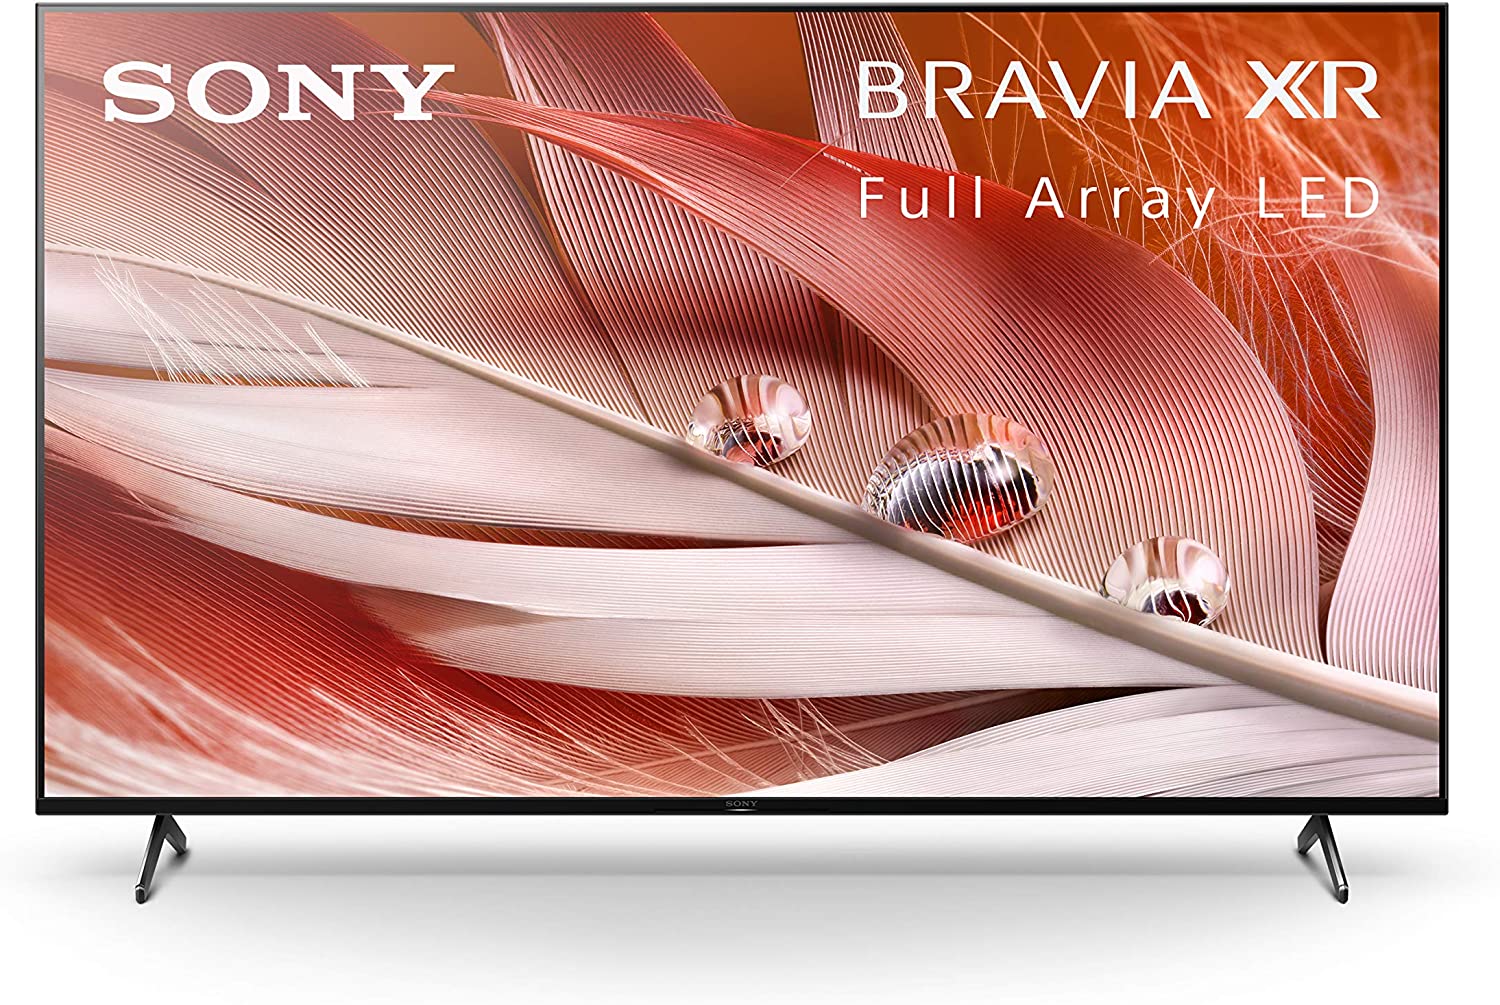 Sony X90J 75 Inch TV: BRAVIA XR Full Array LED 4K Ultra HD Smart Google TV with Dolby Vision HDR and Alexa Compatibility XR75X90J- 2021 Model